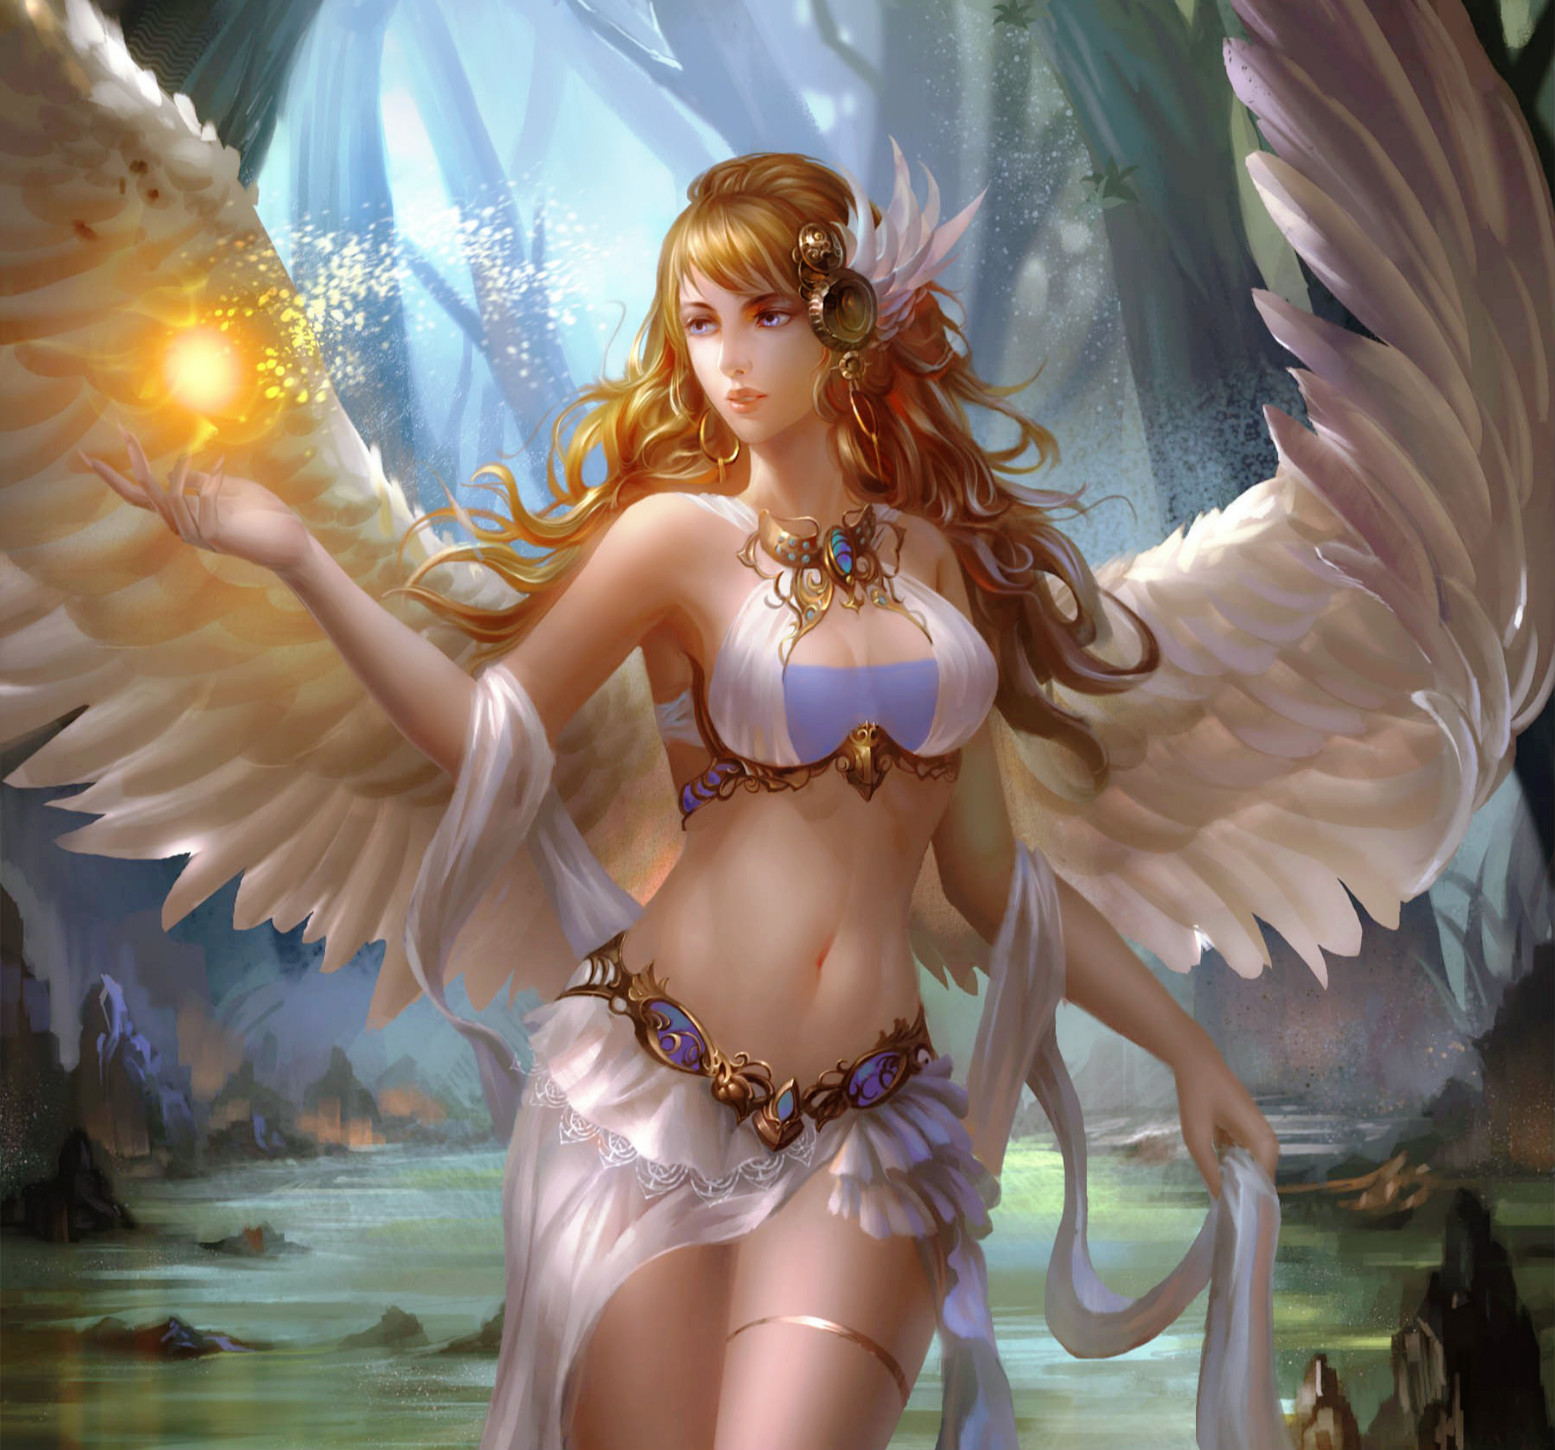 More related mystical women angels.